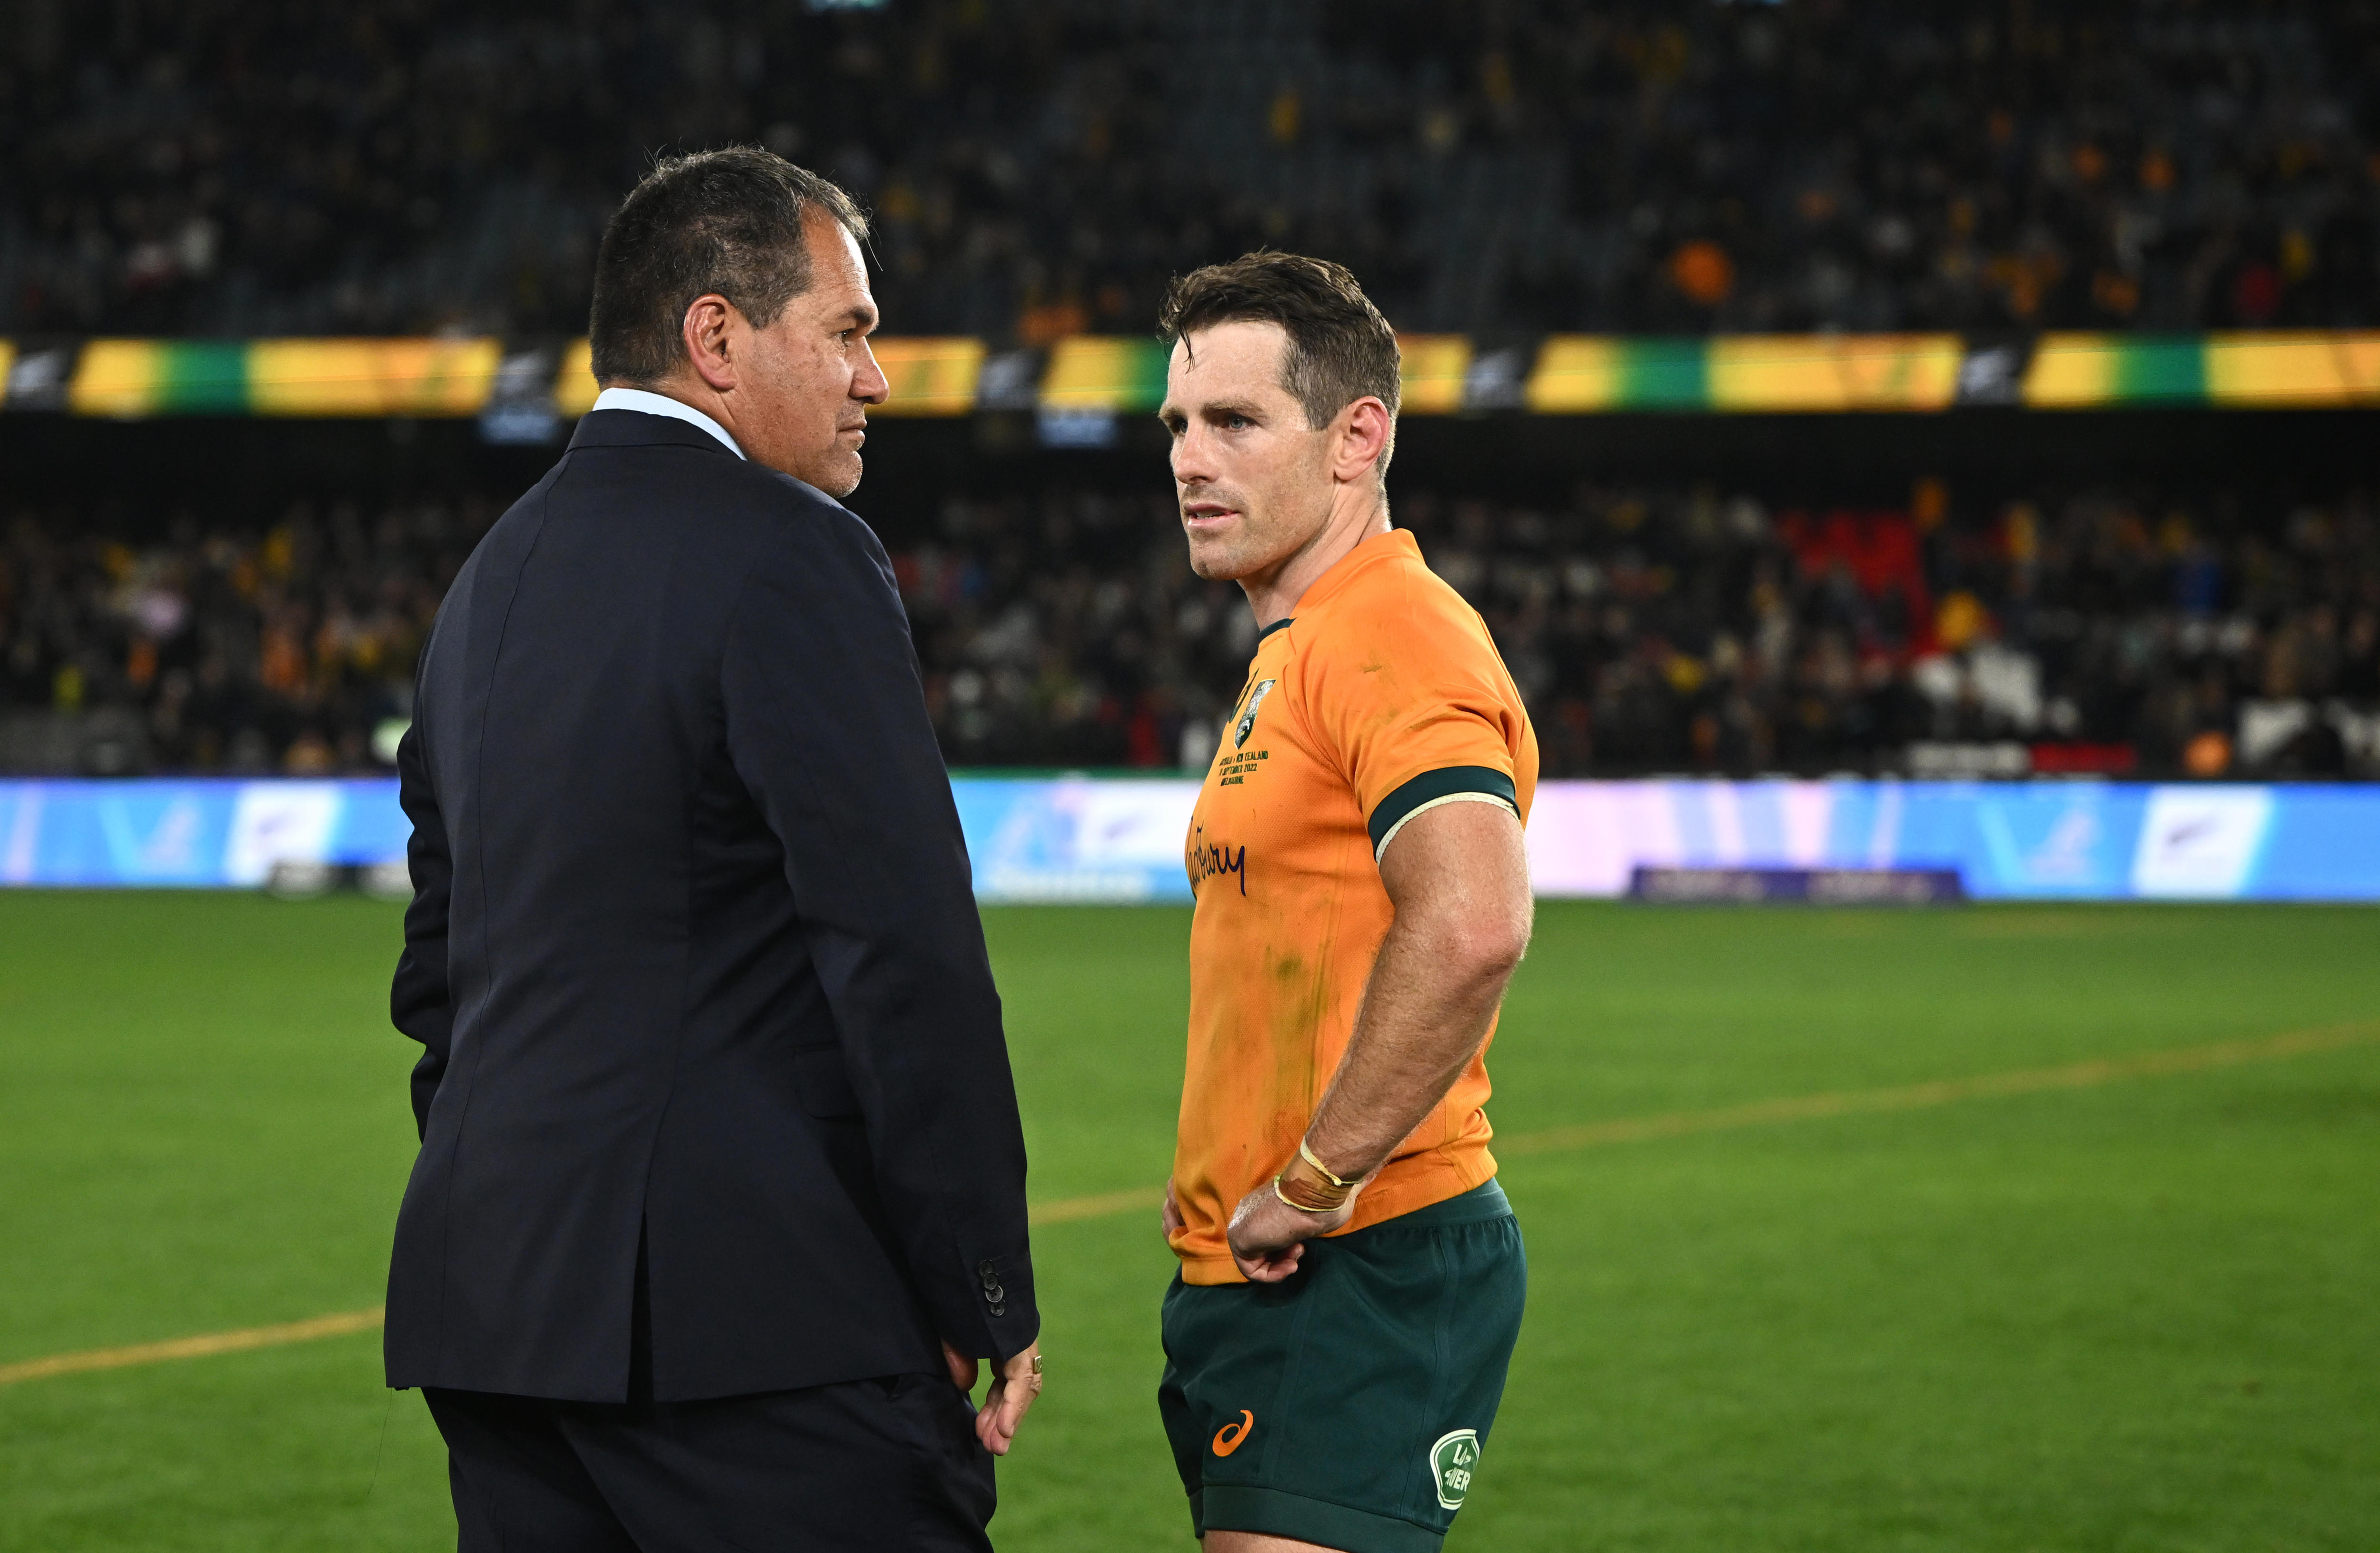 Wallabies shattered after disgraceful refereeing decision in Bledisloe Cup Test loss to All Blacks